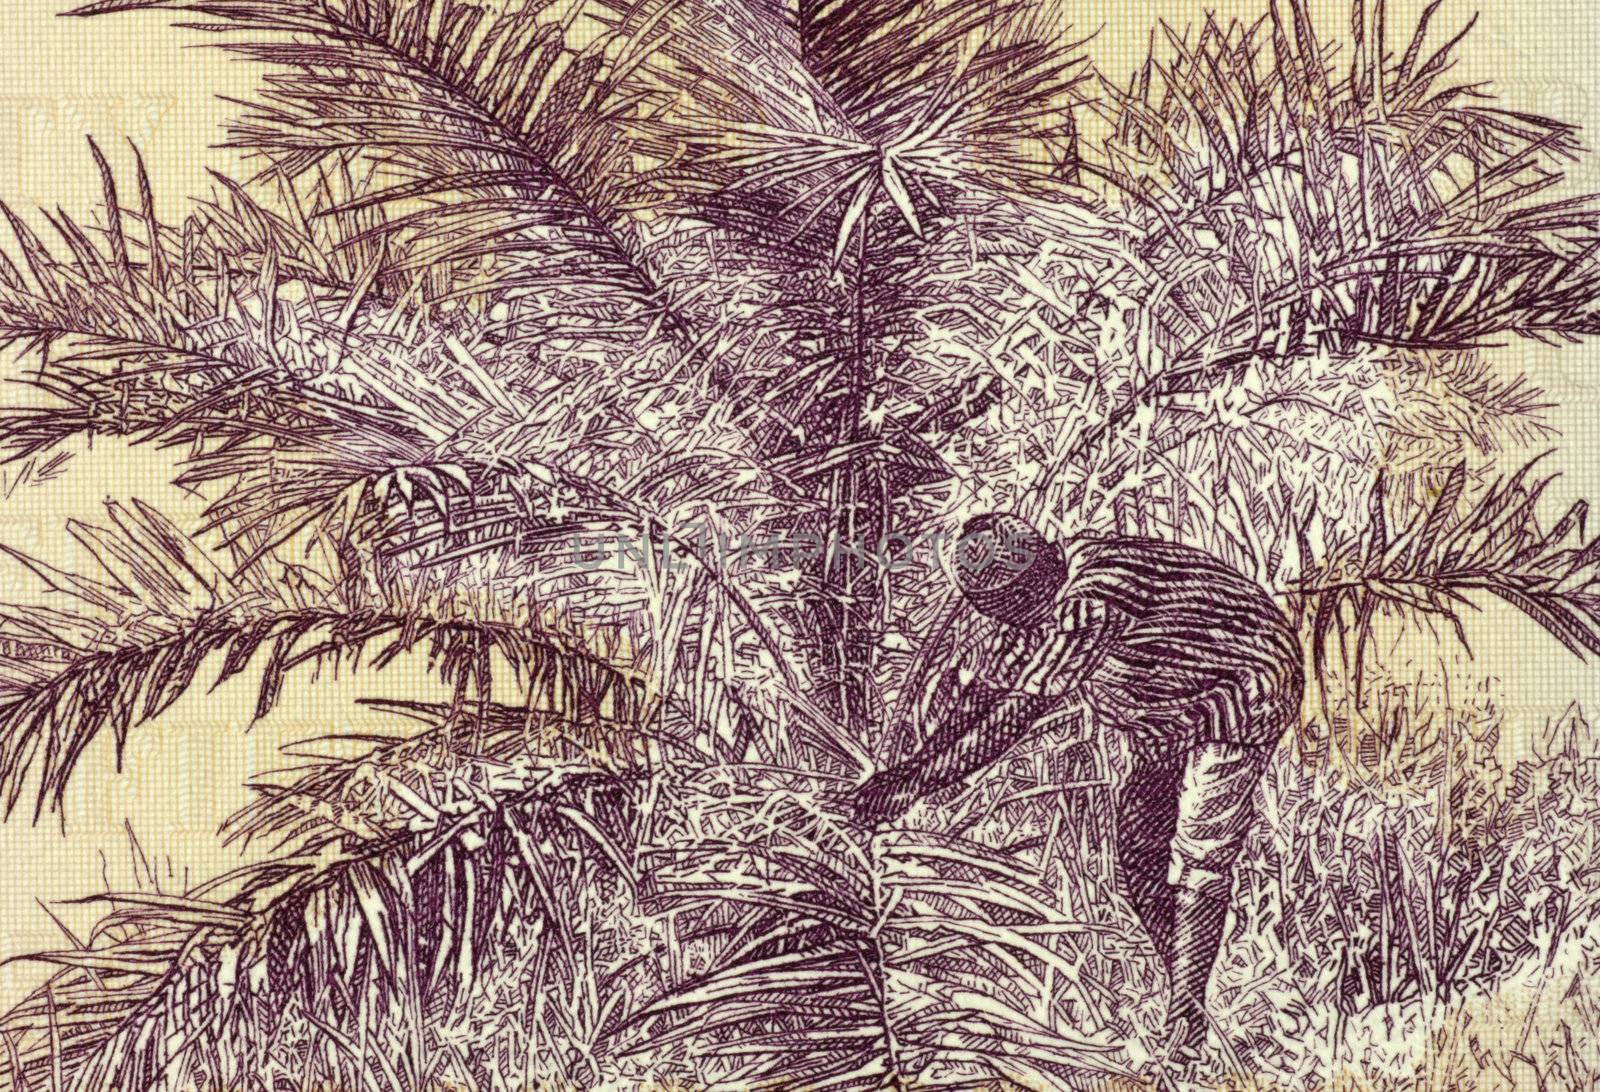 Palm Nut Harvesting on 50 Dollars 2009 Banknote from Liberia.